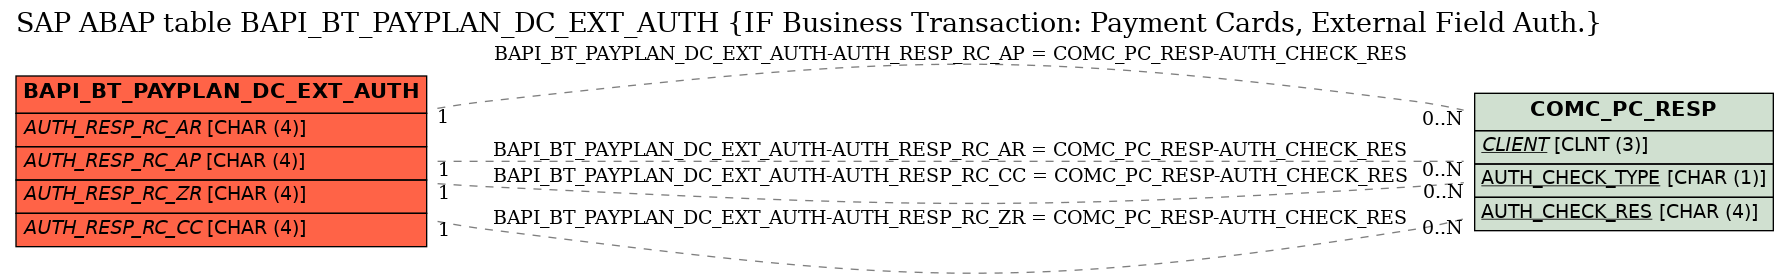 E-R Diagram for table BAPI_BT_PAYPLAN_DC_EXT_AUTH (IF Business Transaction: Payment Cards, External Field Auth.)